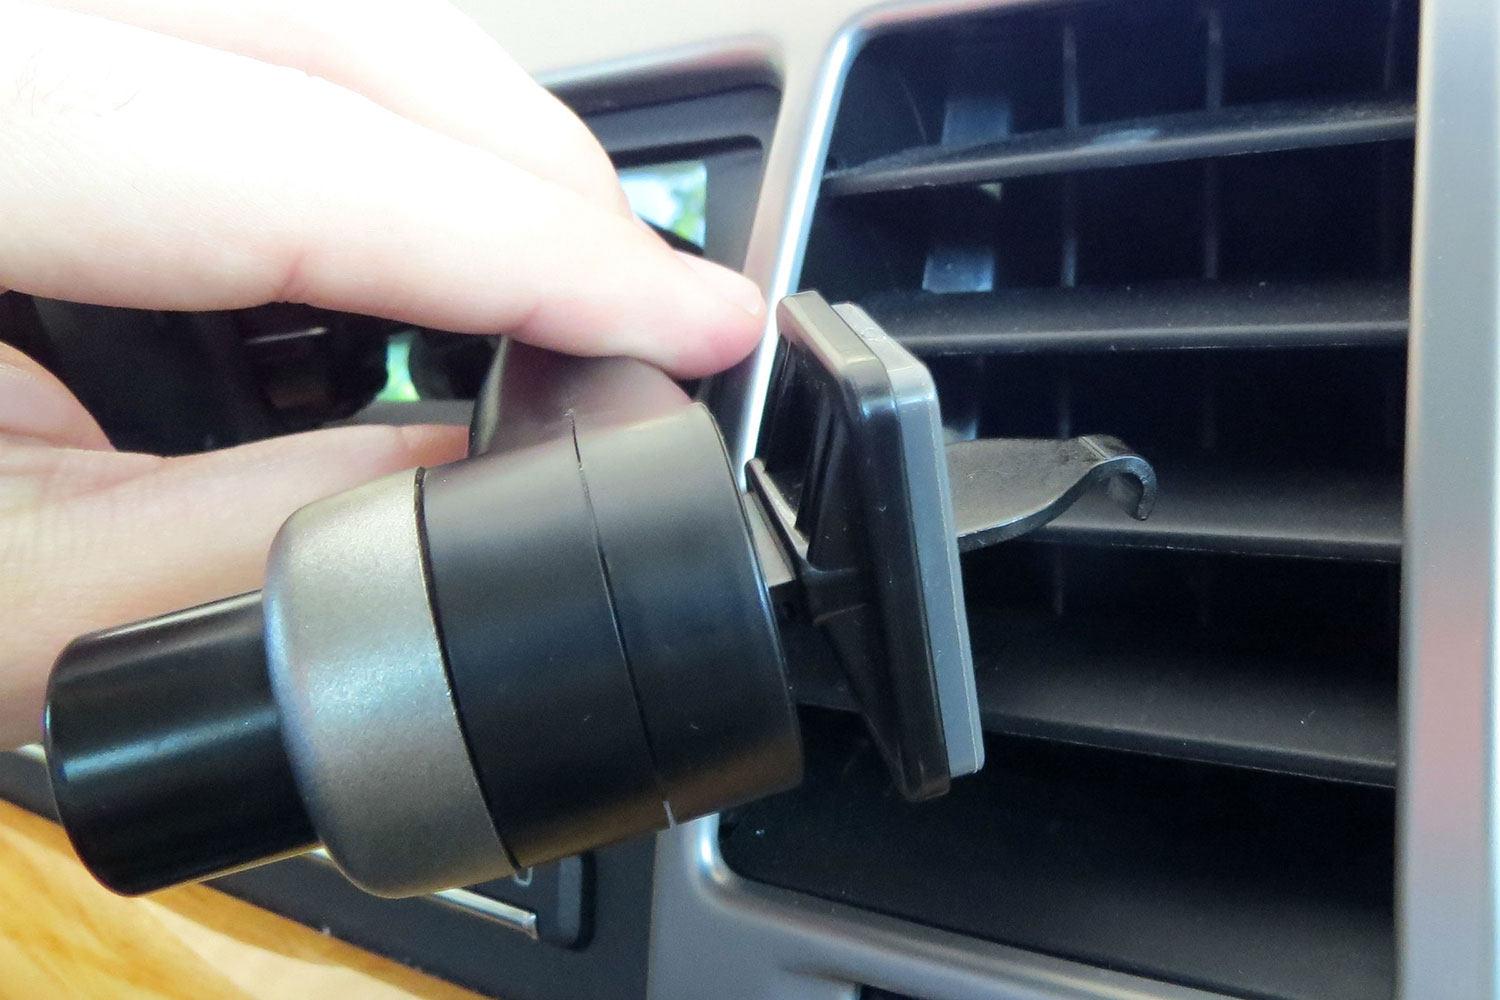 hands on satechi car mounts and accessories ventie adjustable vent phone mount lock